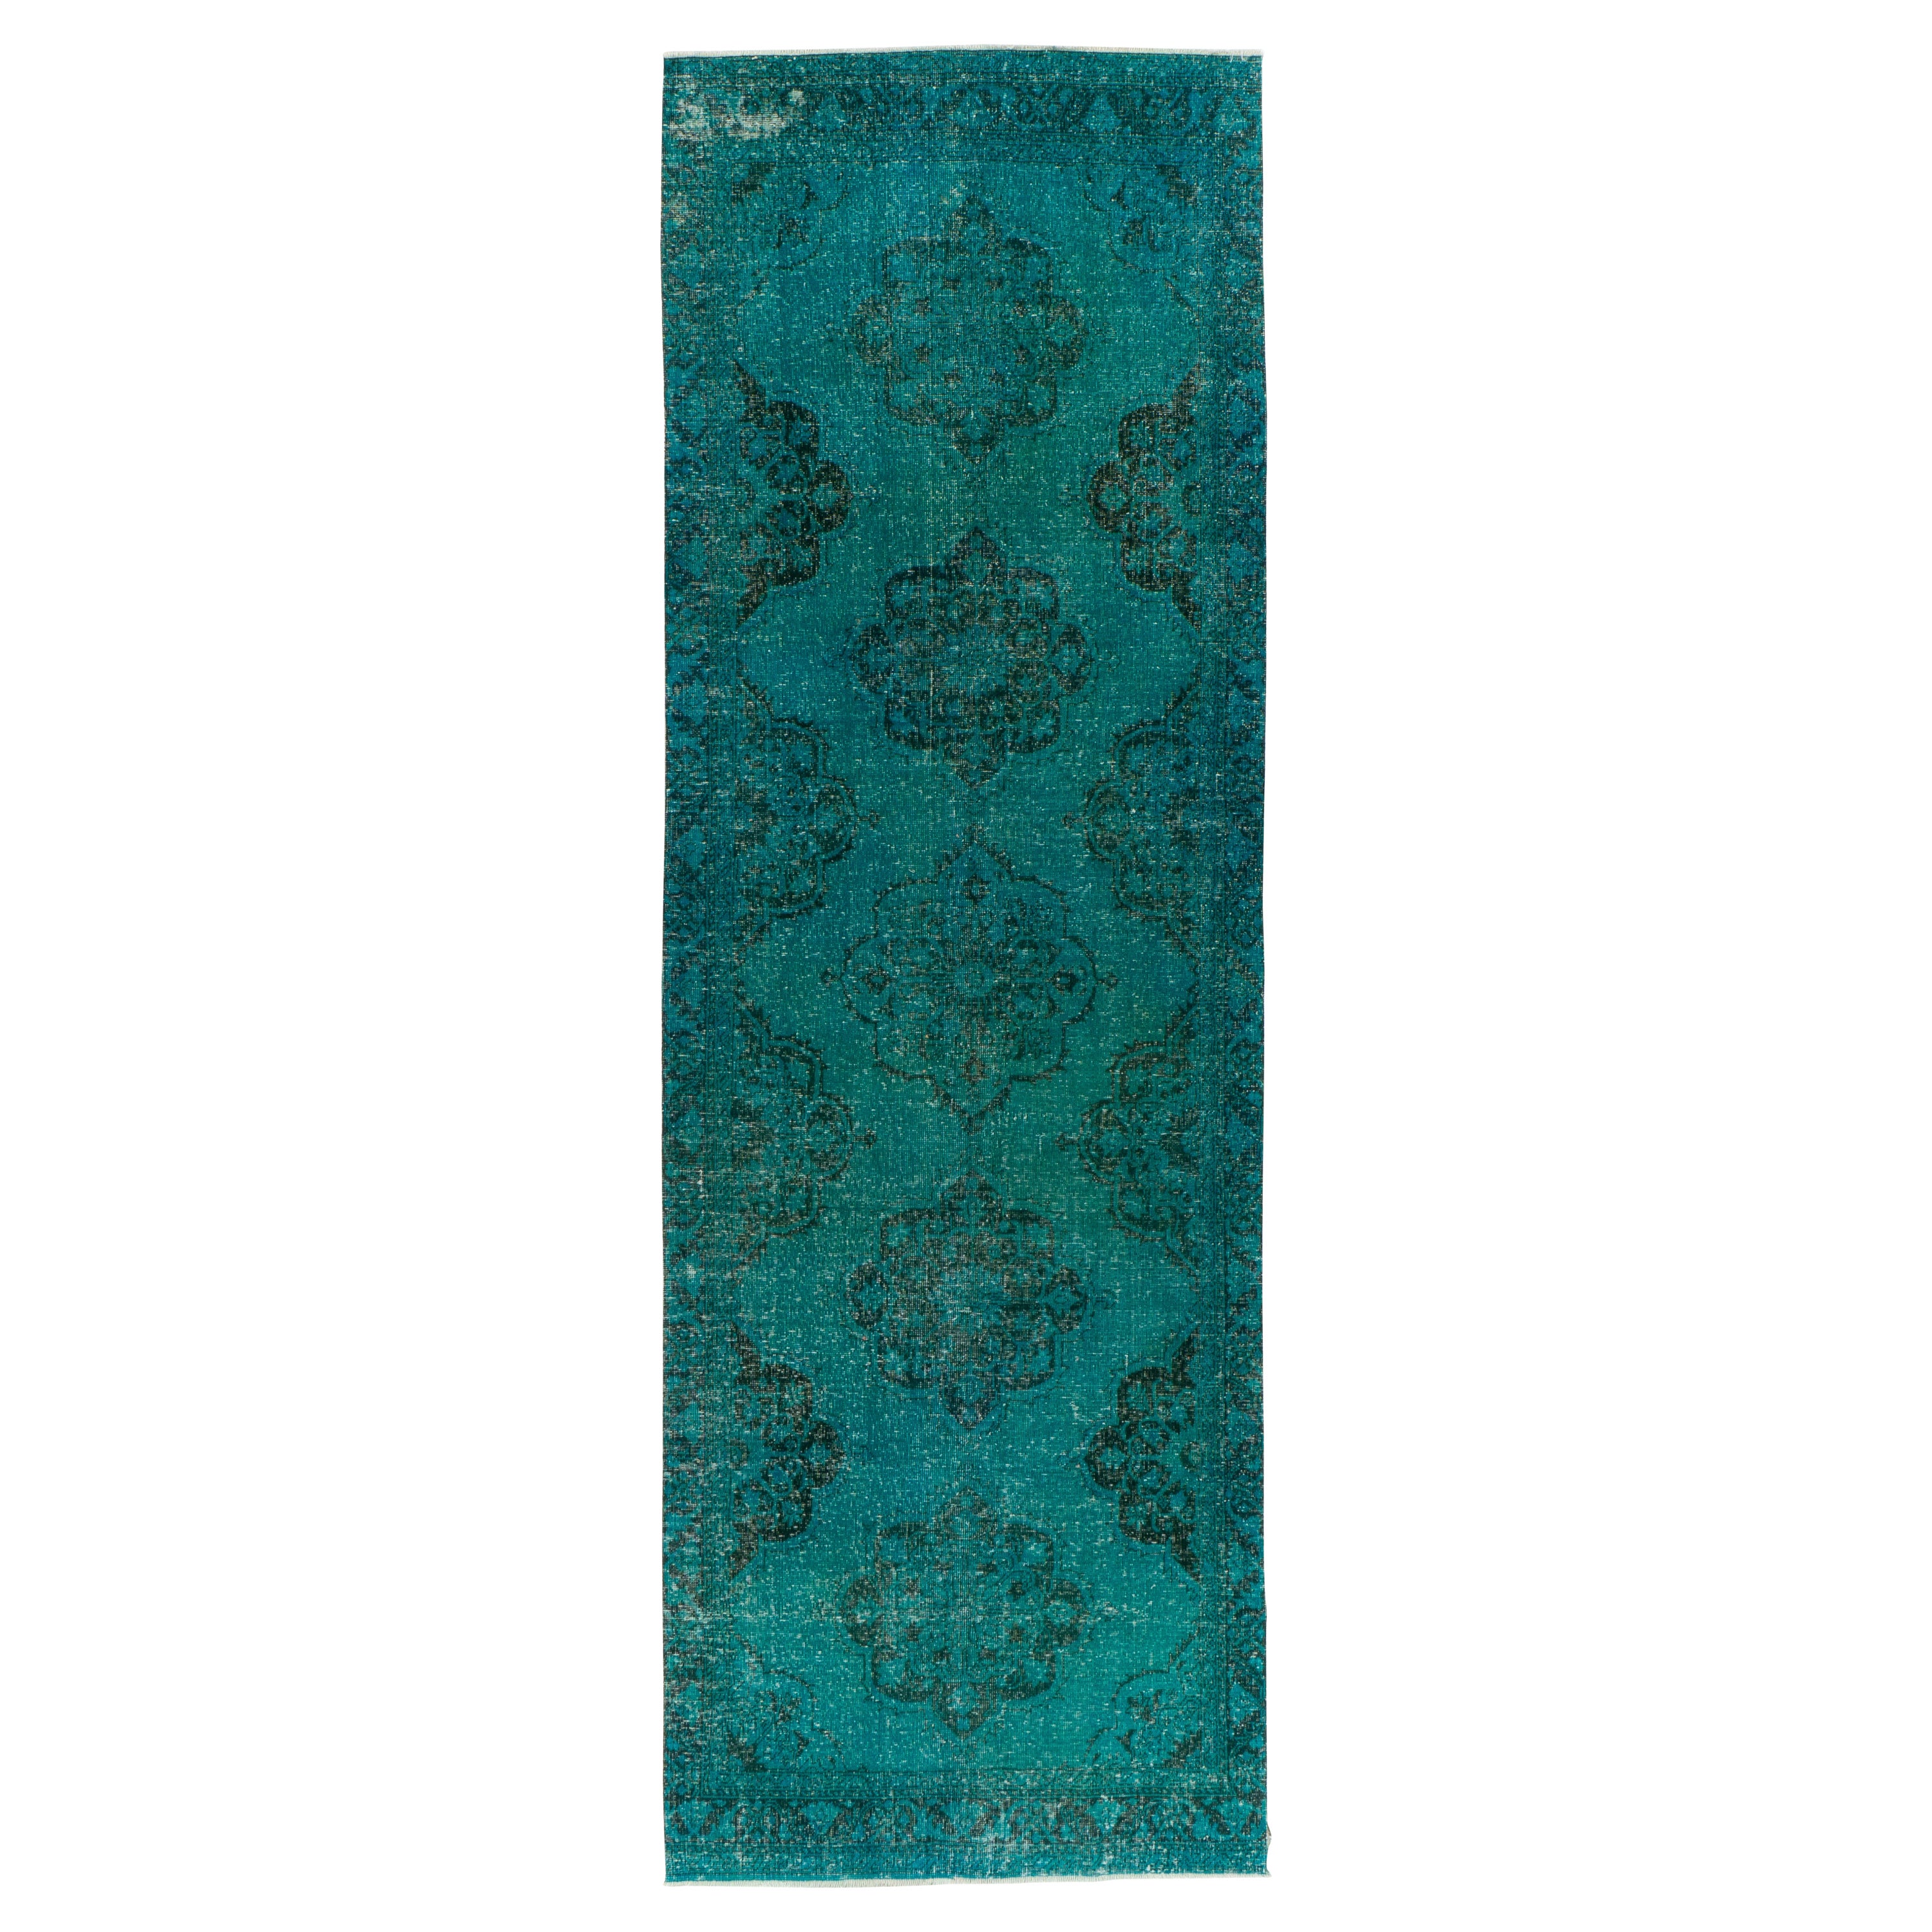 4.6x13 Ft Turkish Hallway Runner Rug in Teal Blue. Contemporary Corridor Carpet For Sale